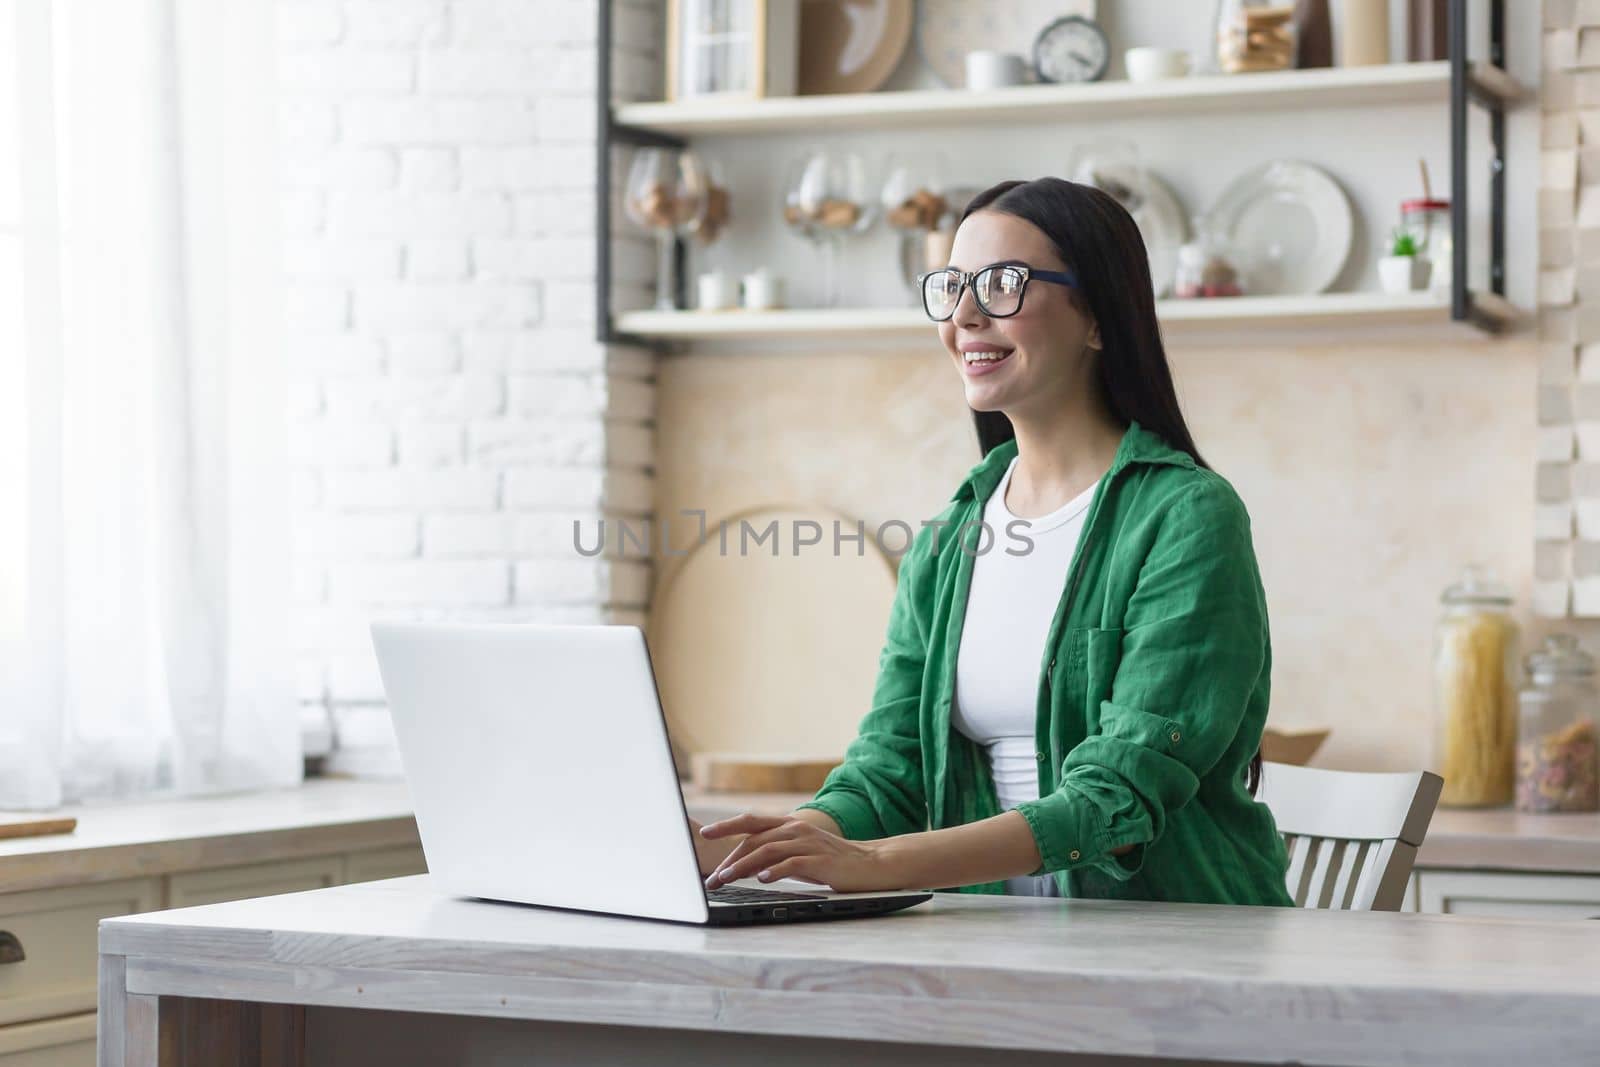 A young woman is working at home in the kitchen on a laptop.